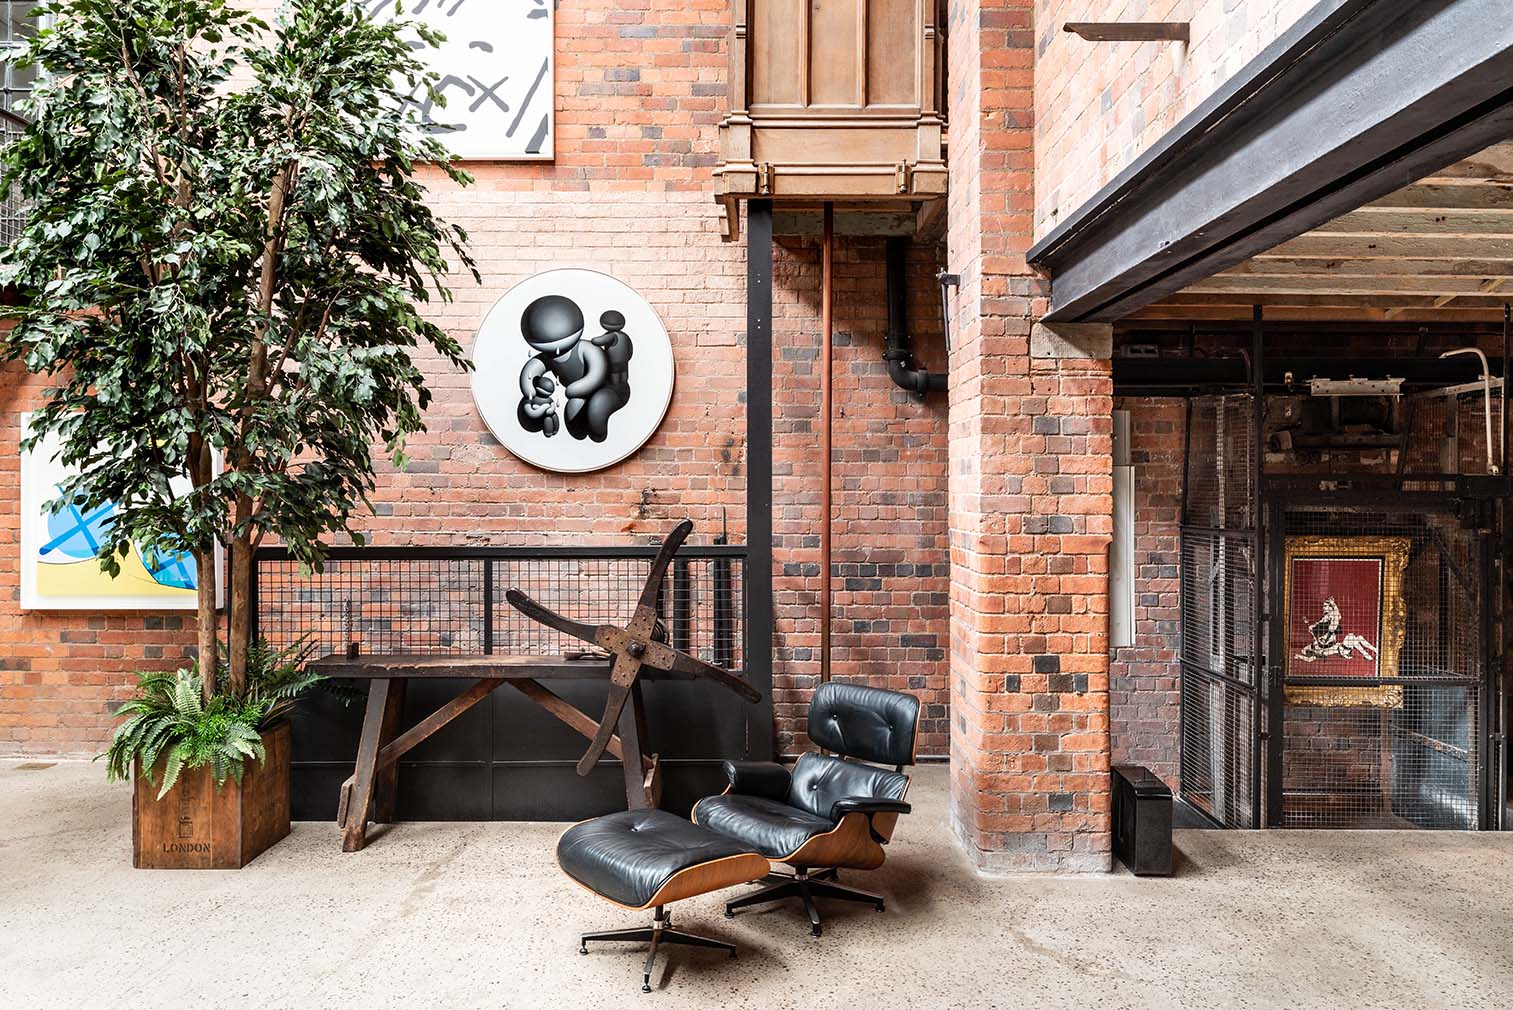 The Compound is an award-winning warehouse conversion in Birmingham’s Jewellery Quarter home to a cinema, office space and set of apartments.